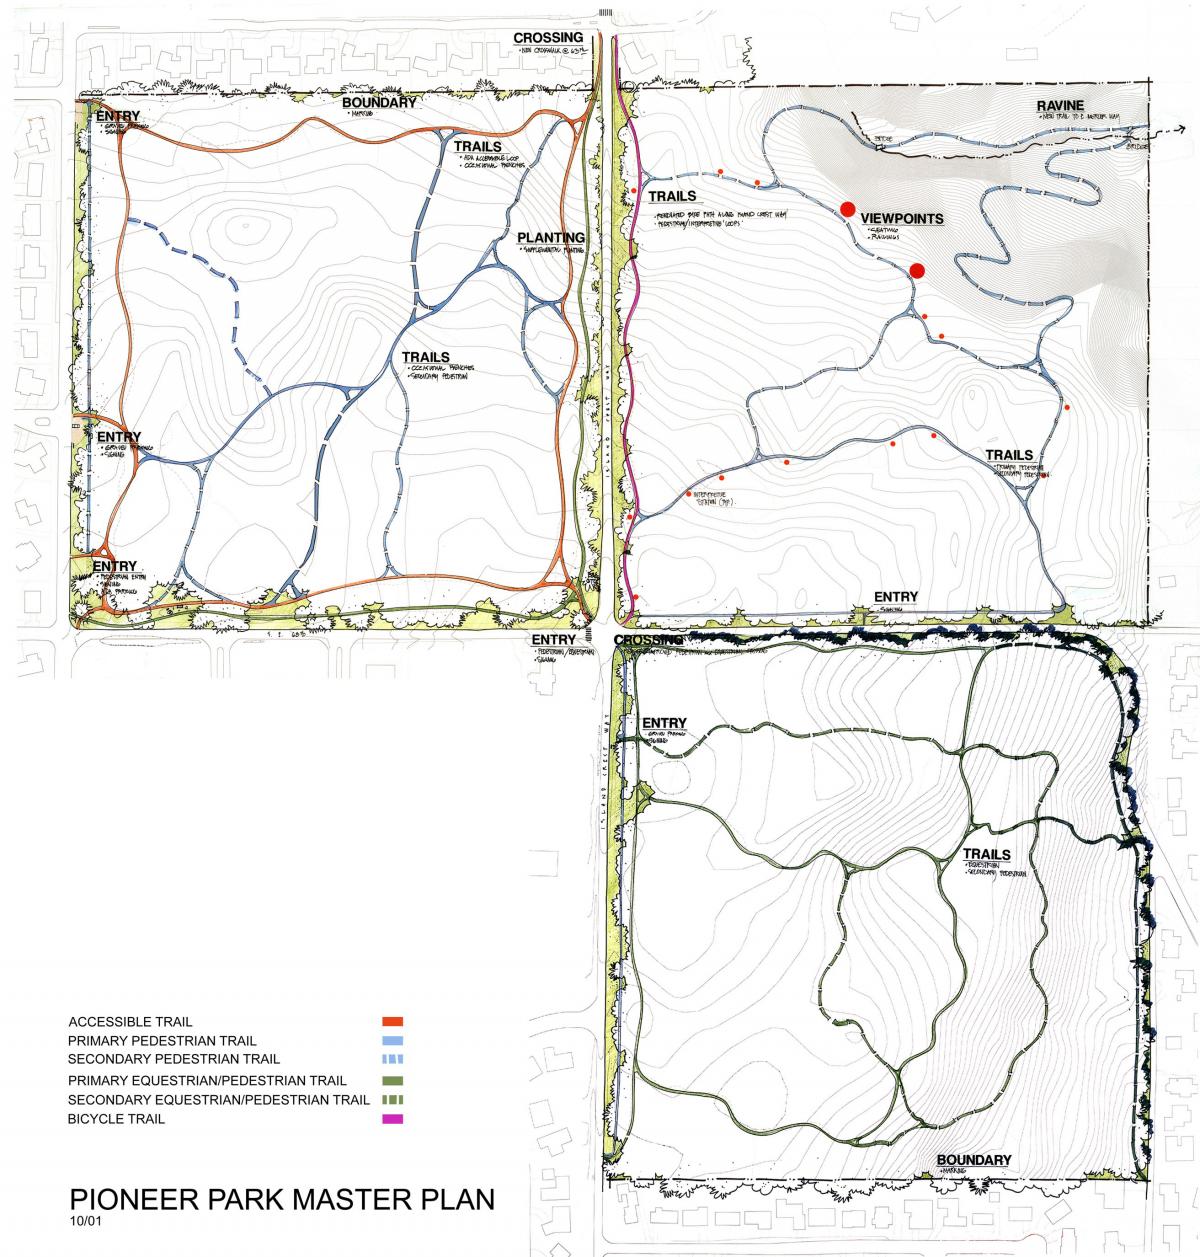 A master plan document with three park quadrants and different colored lines indicating trails, bike paths, and other features